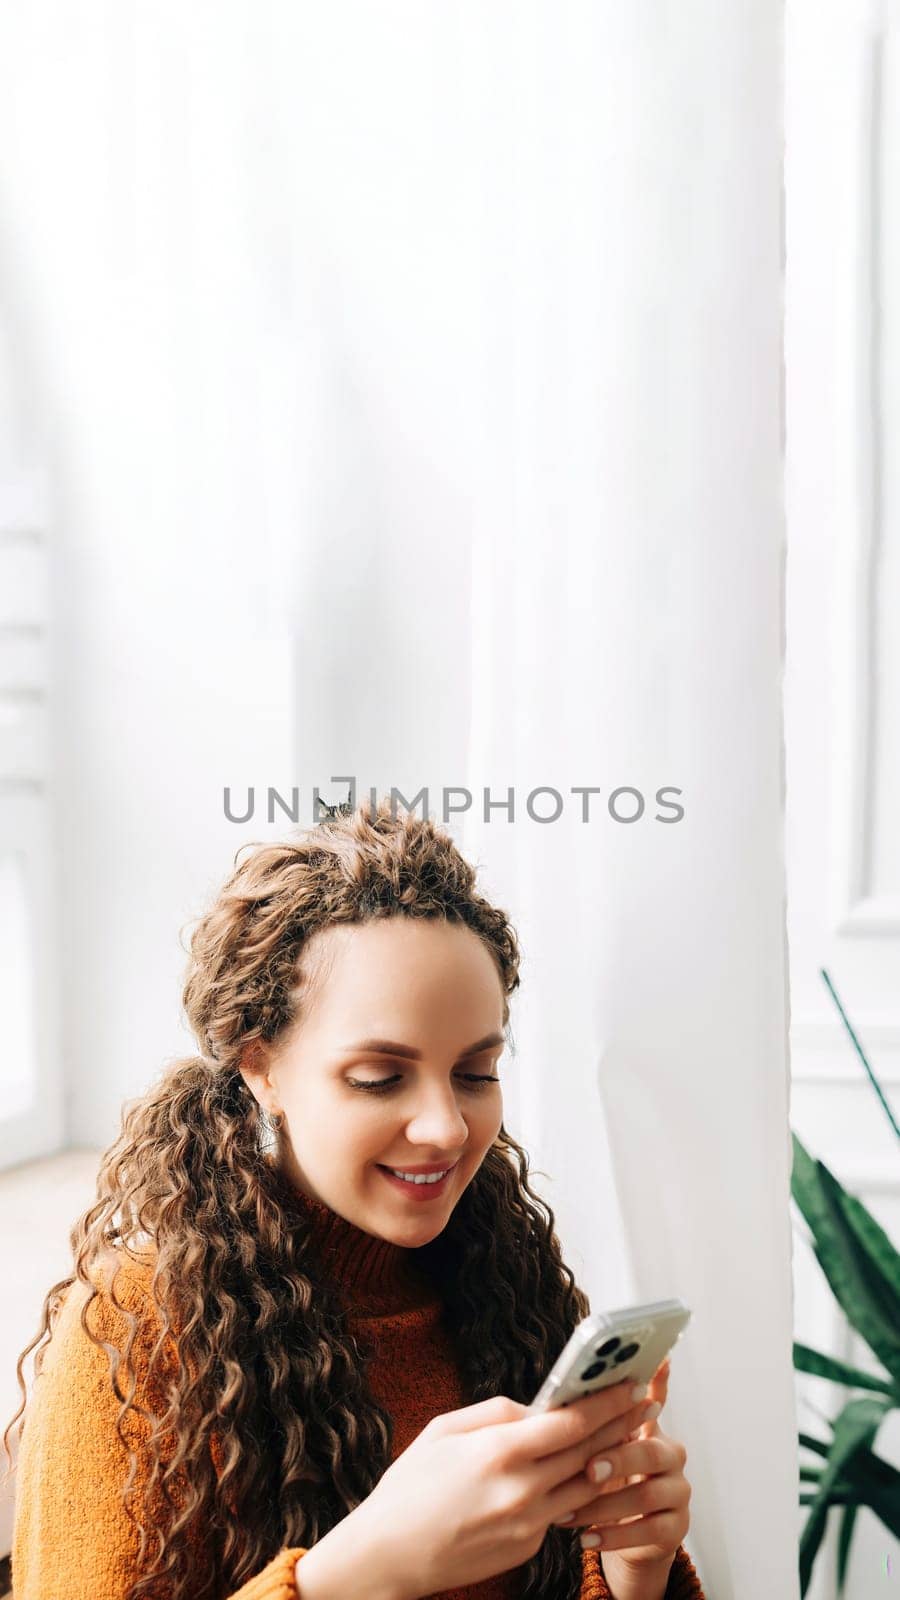 Young woman browsing online on cellphone while sitting comfortably. Happy woman shopping on smartphone while relaxing on couch. Smiling lady using smartphone for social media and e-commerce.